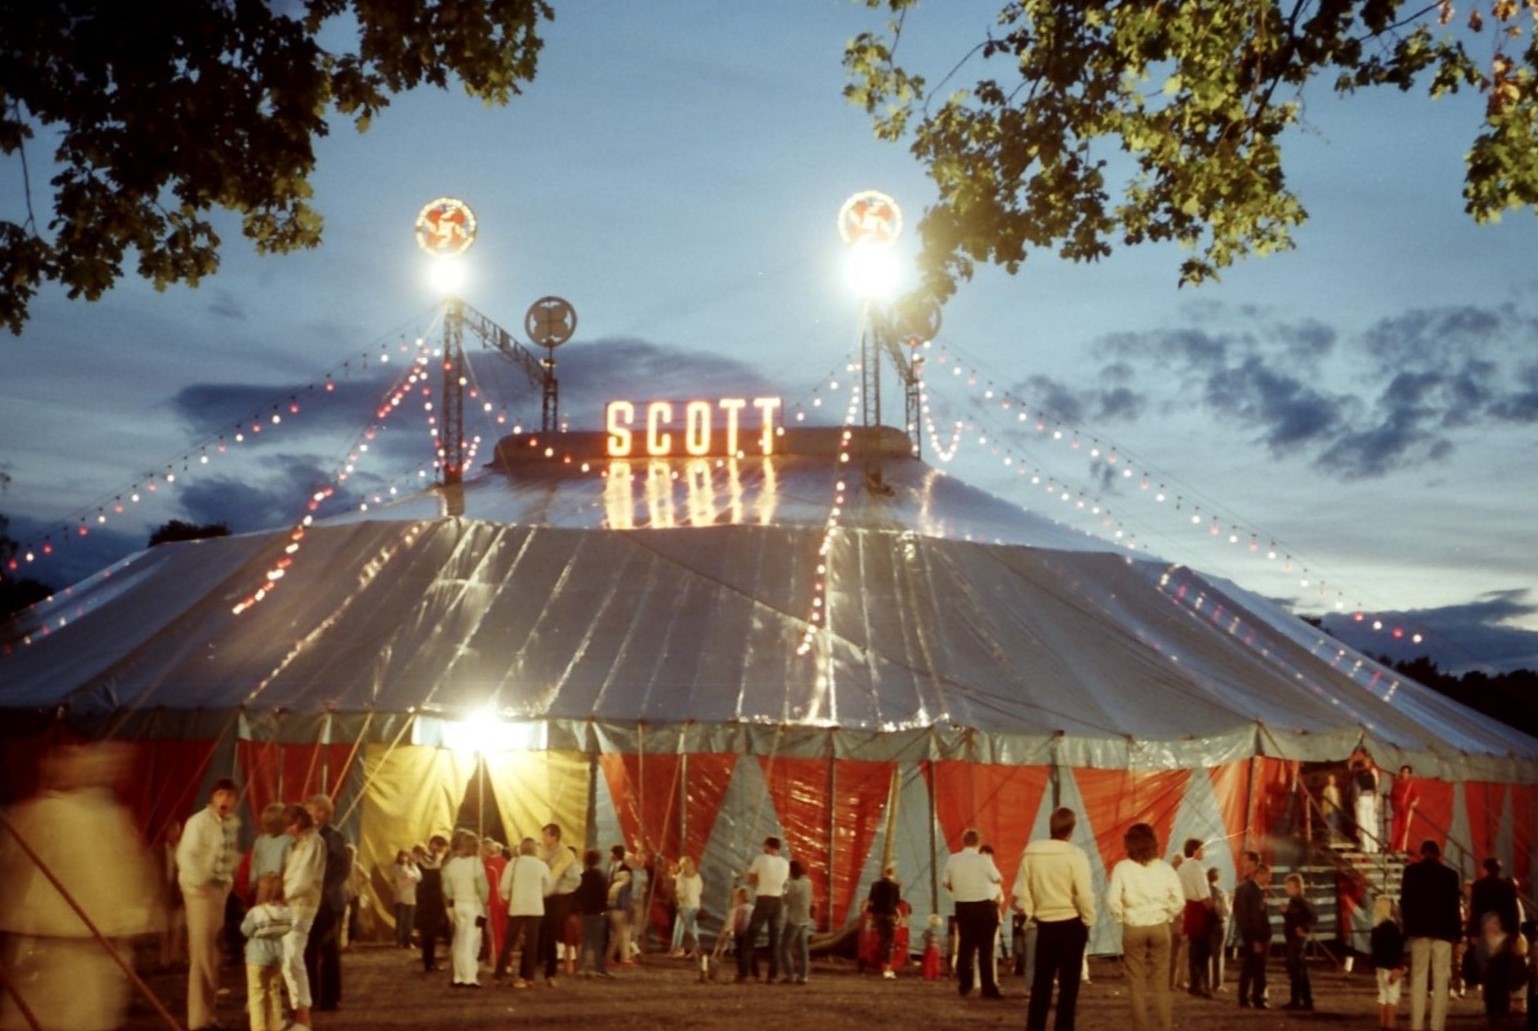 6-facts-you-must-know-about-cirkus-scott